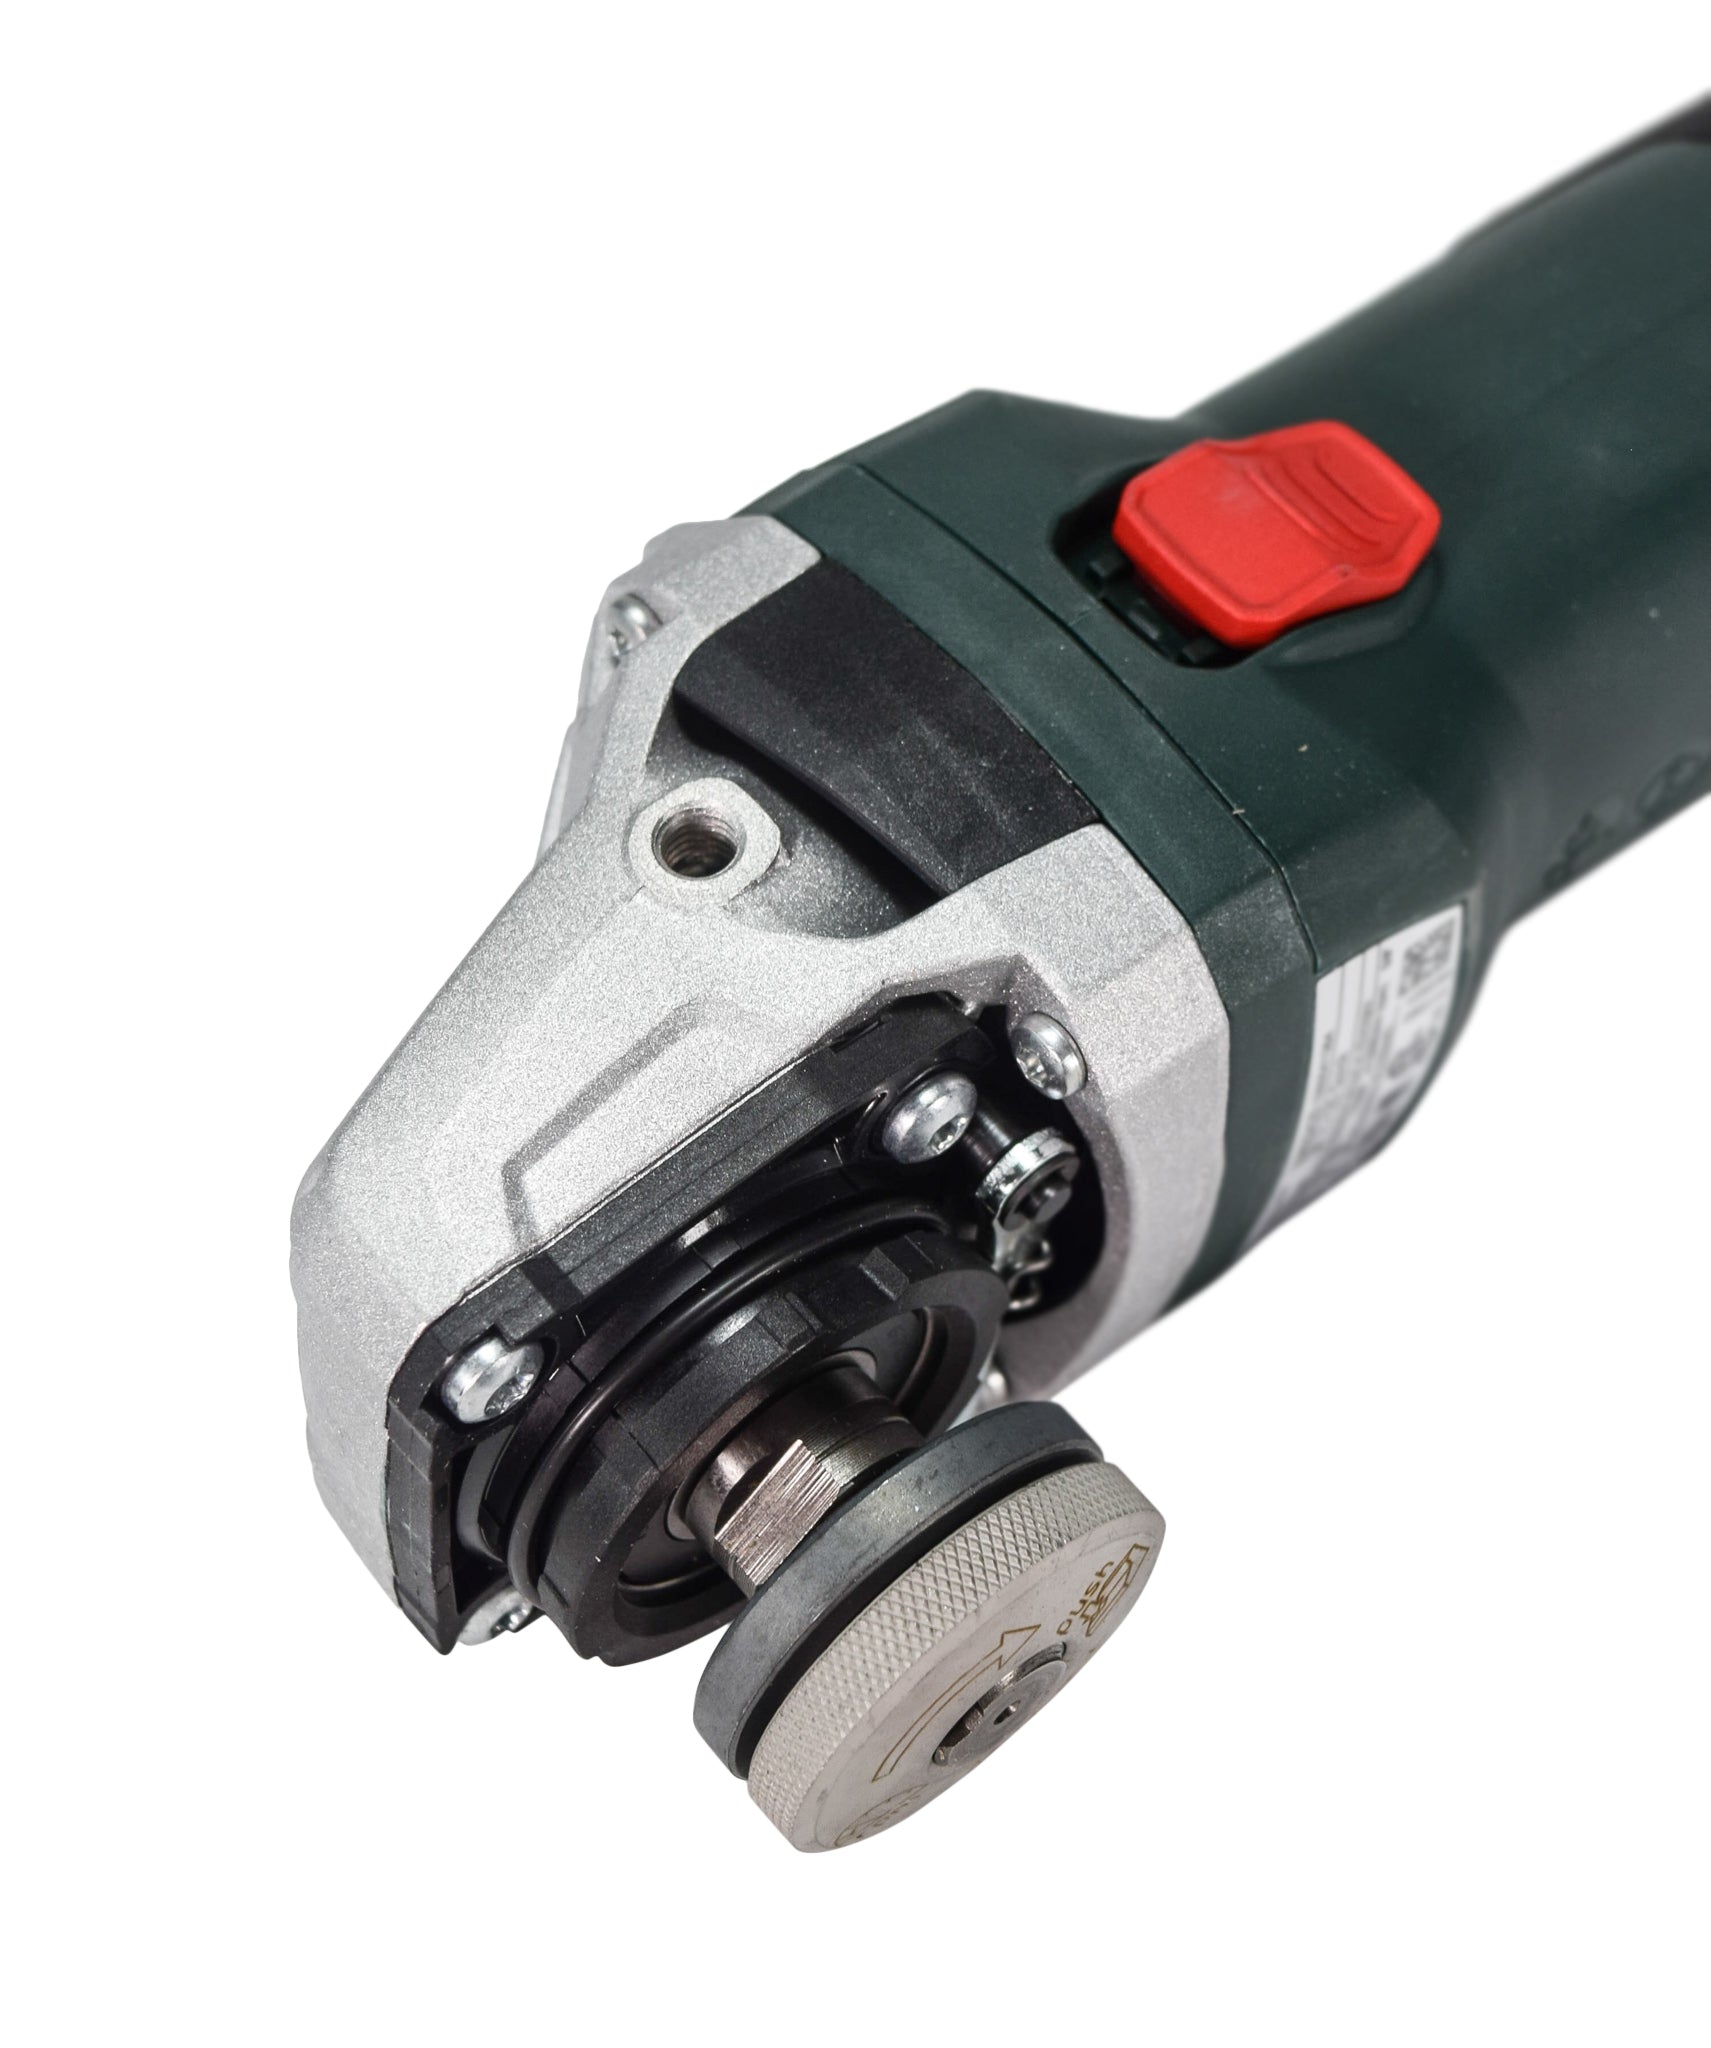 Metabo-603623420-4.5-inch-5-inch-Angle-Grinder-11-000-Rpm-11.0-Amps-with-Lock-on-image-6